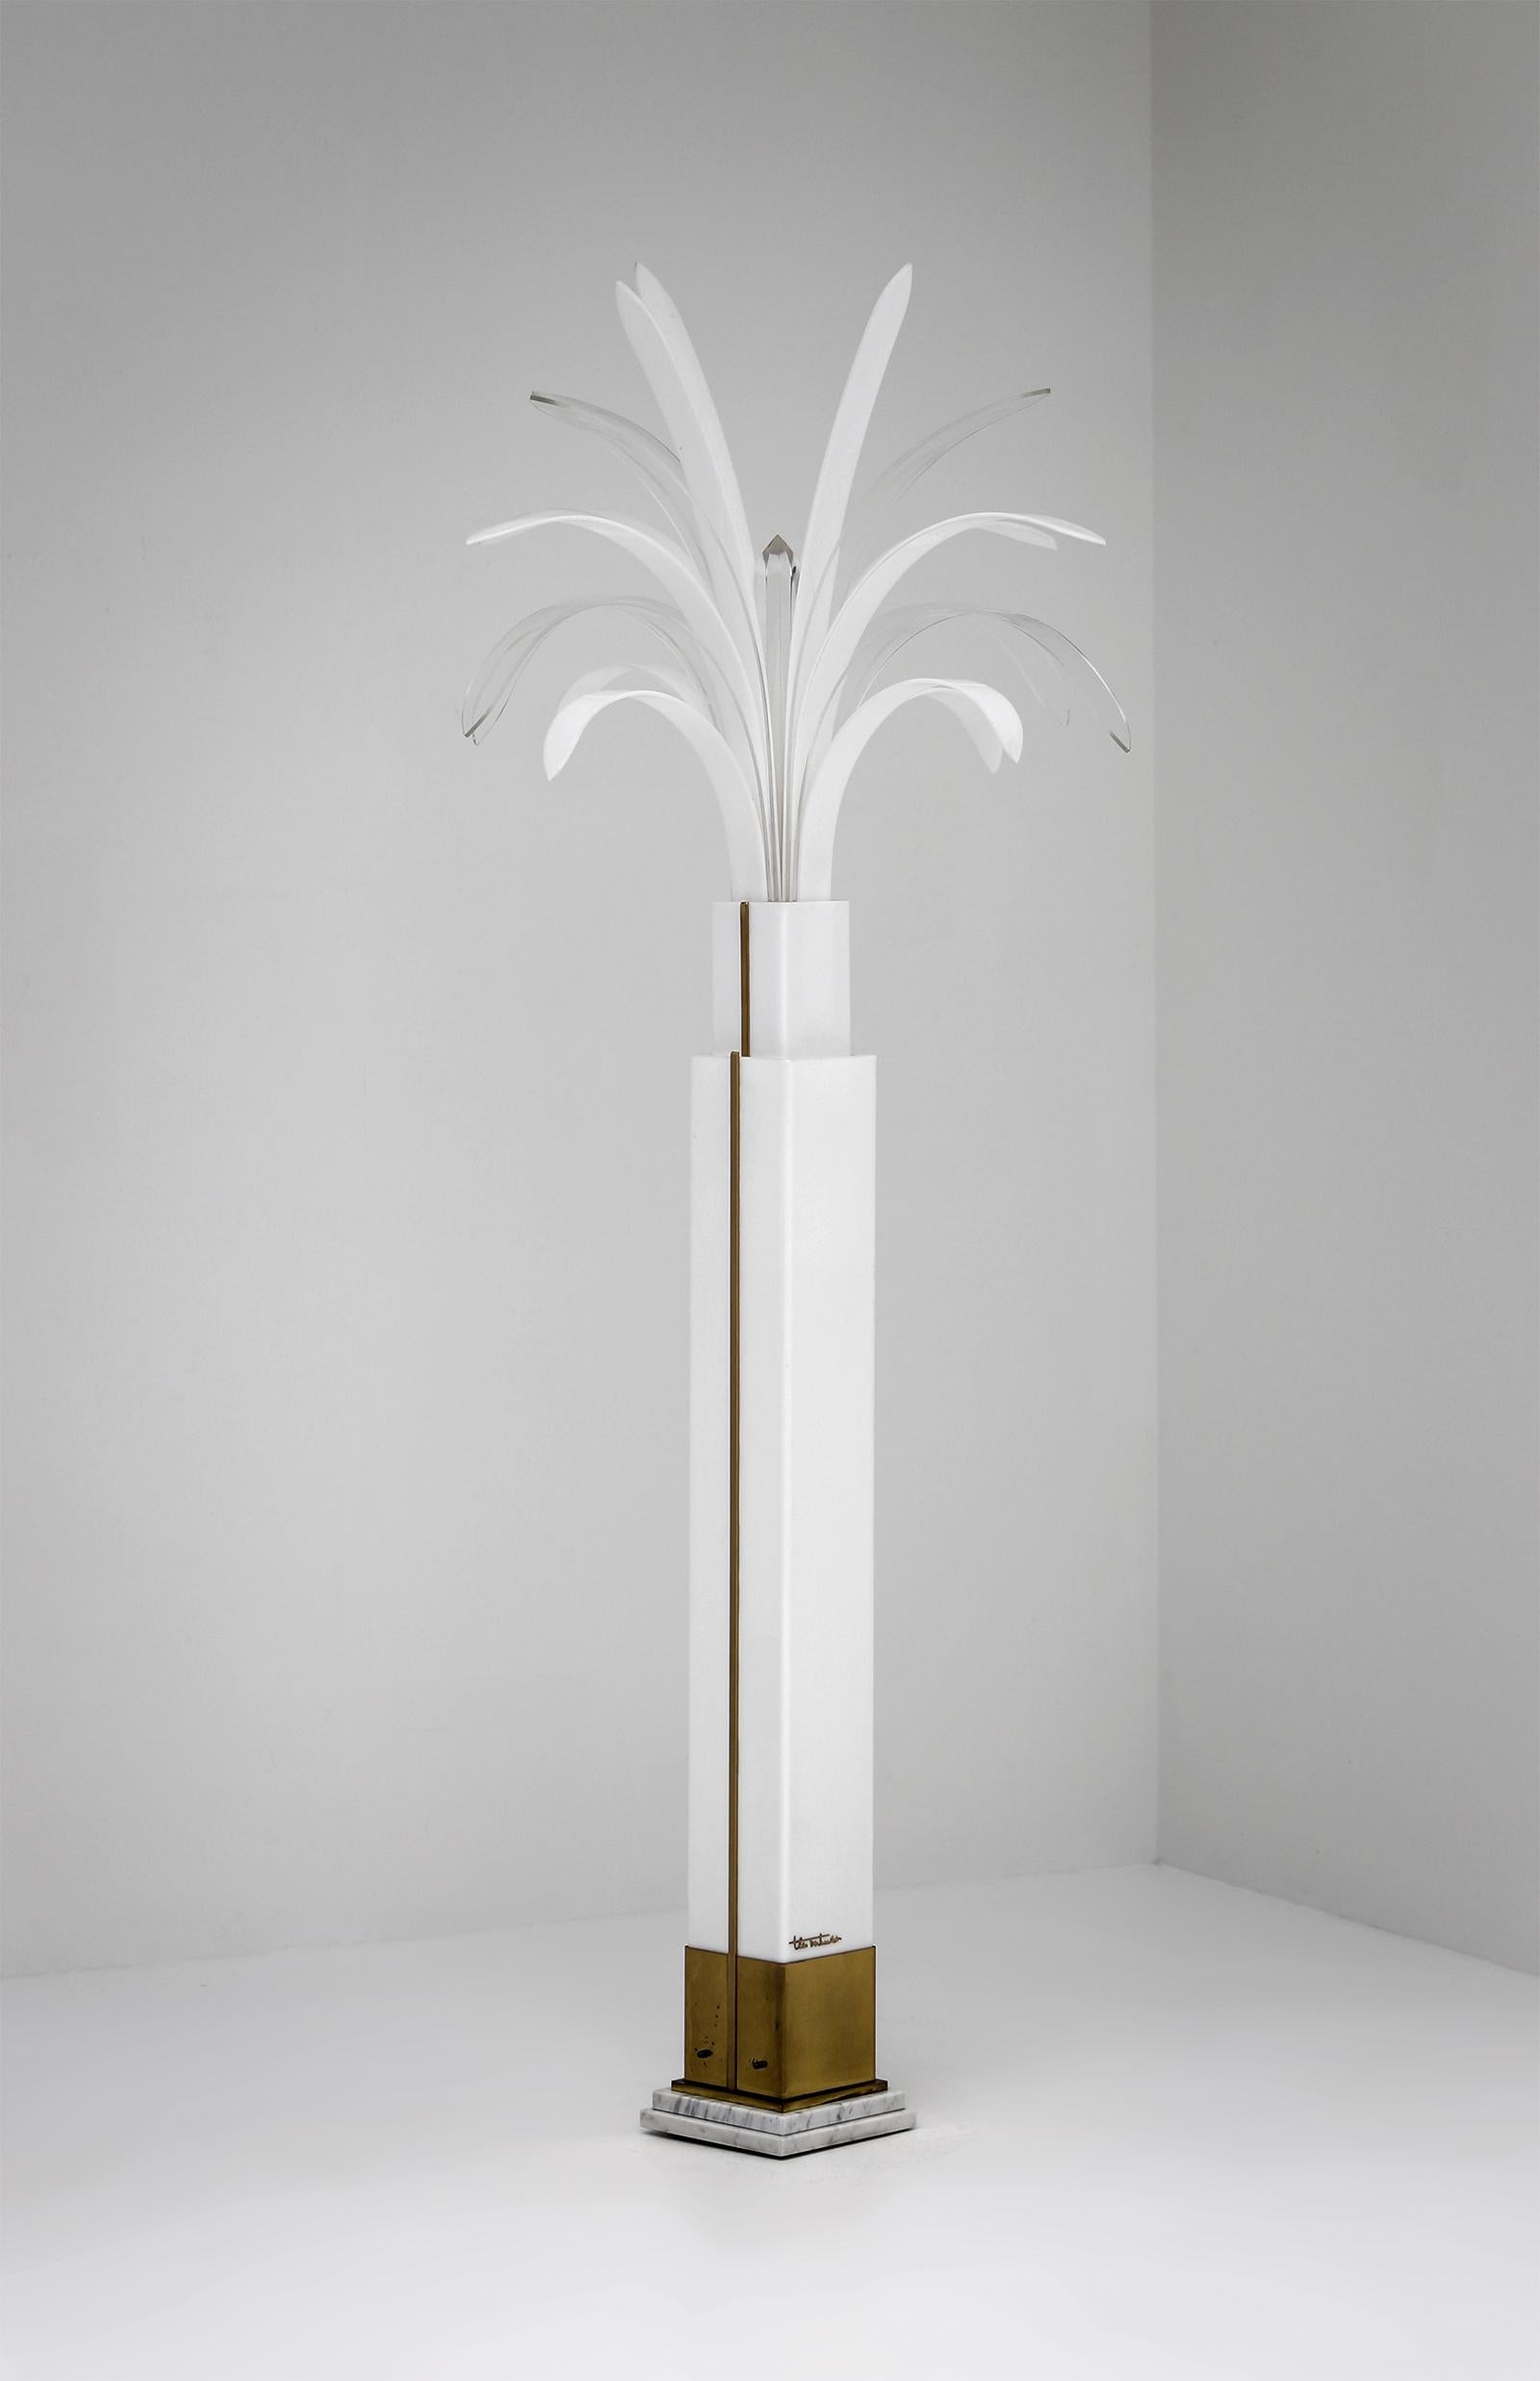 Late 20th Century Mid-Century Modern White Palmtree Floor Lamp in Perspex by Theo Verhulst, 1982 For Sale